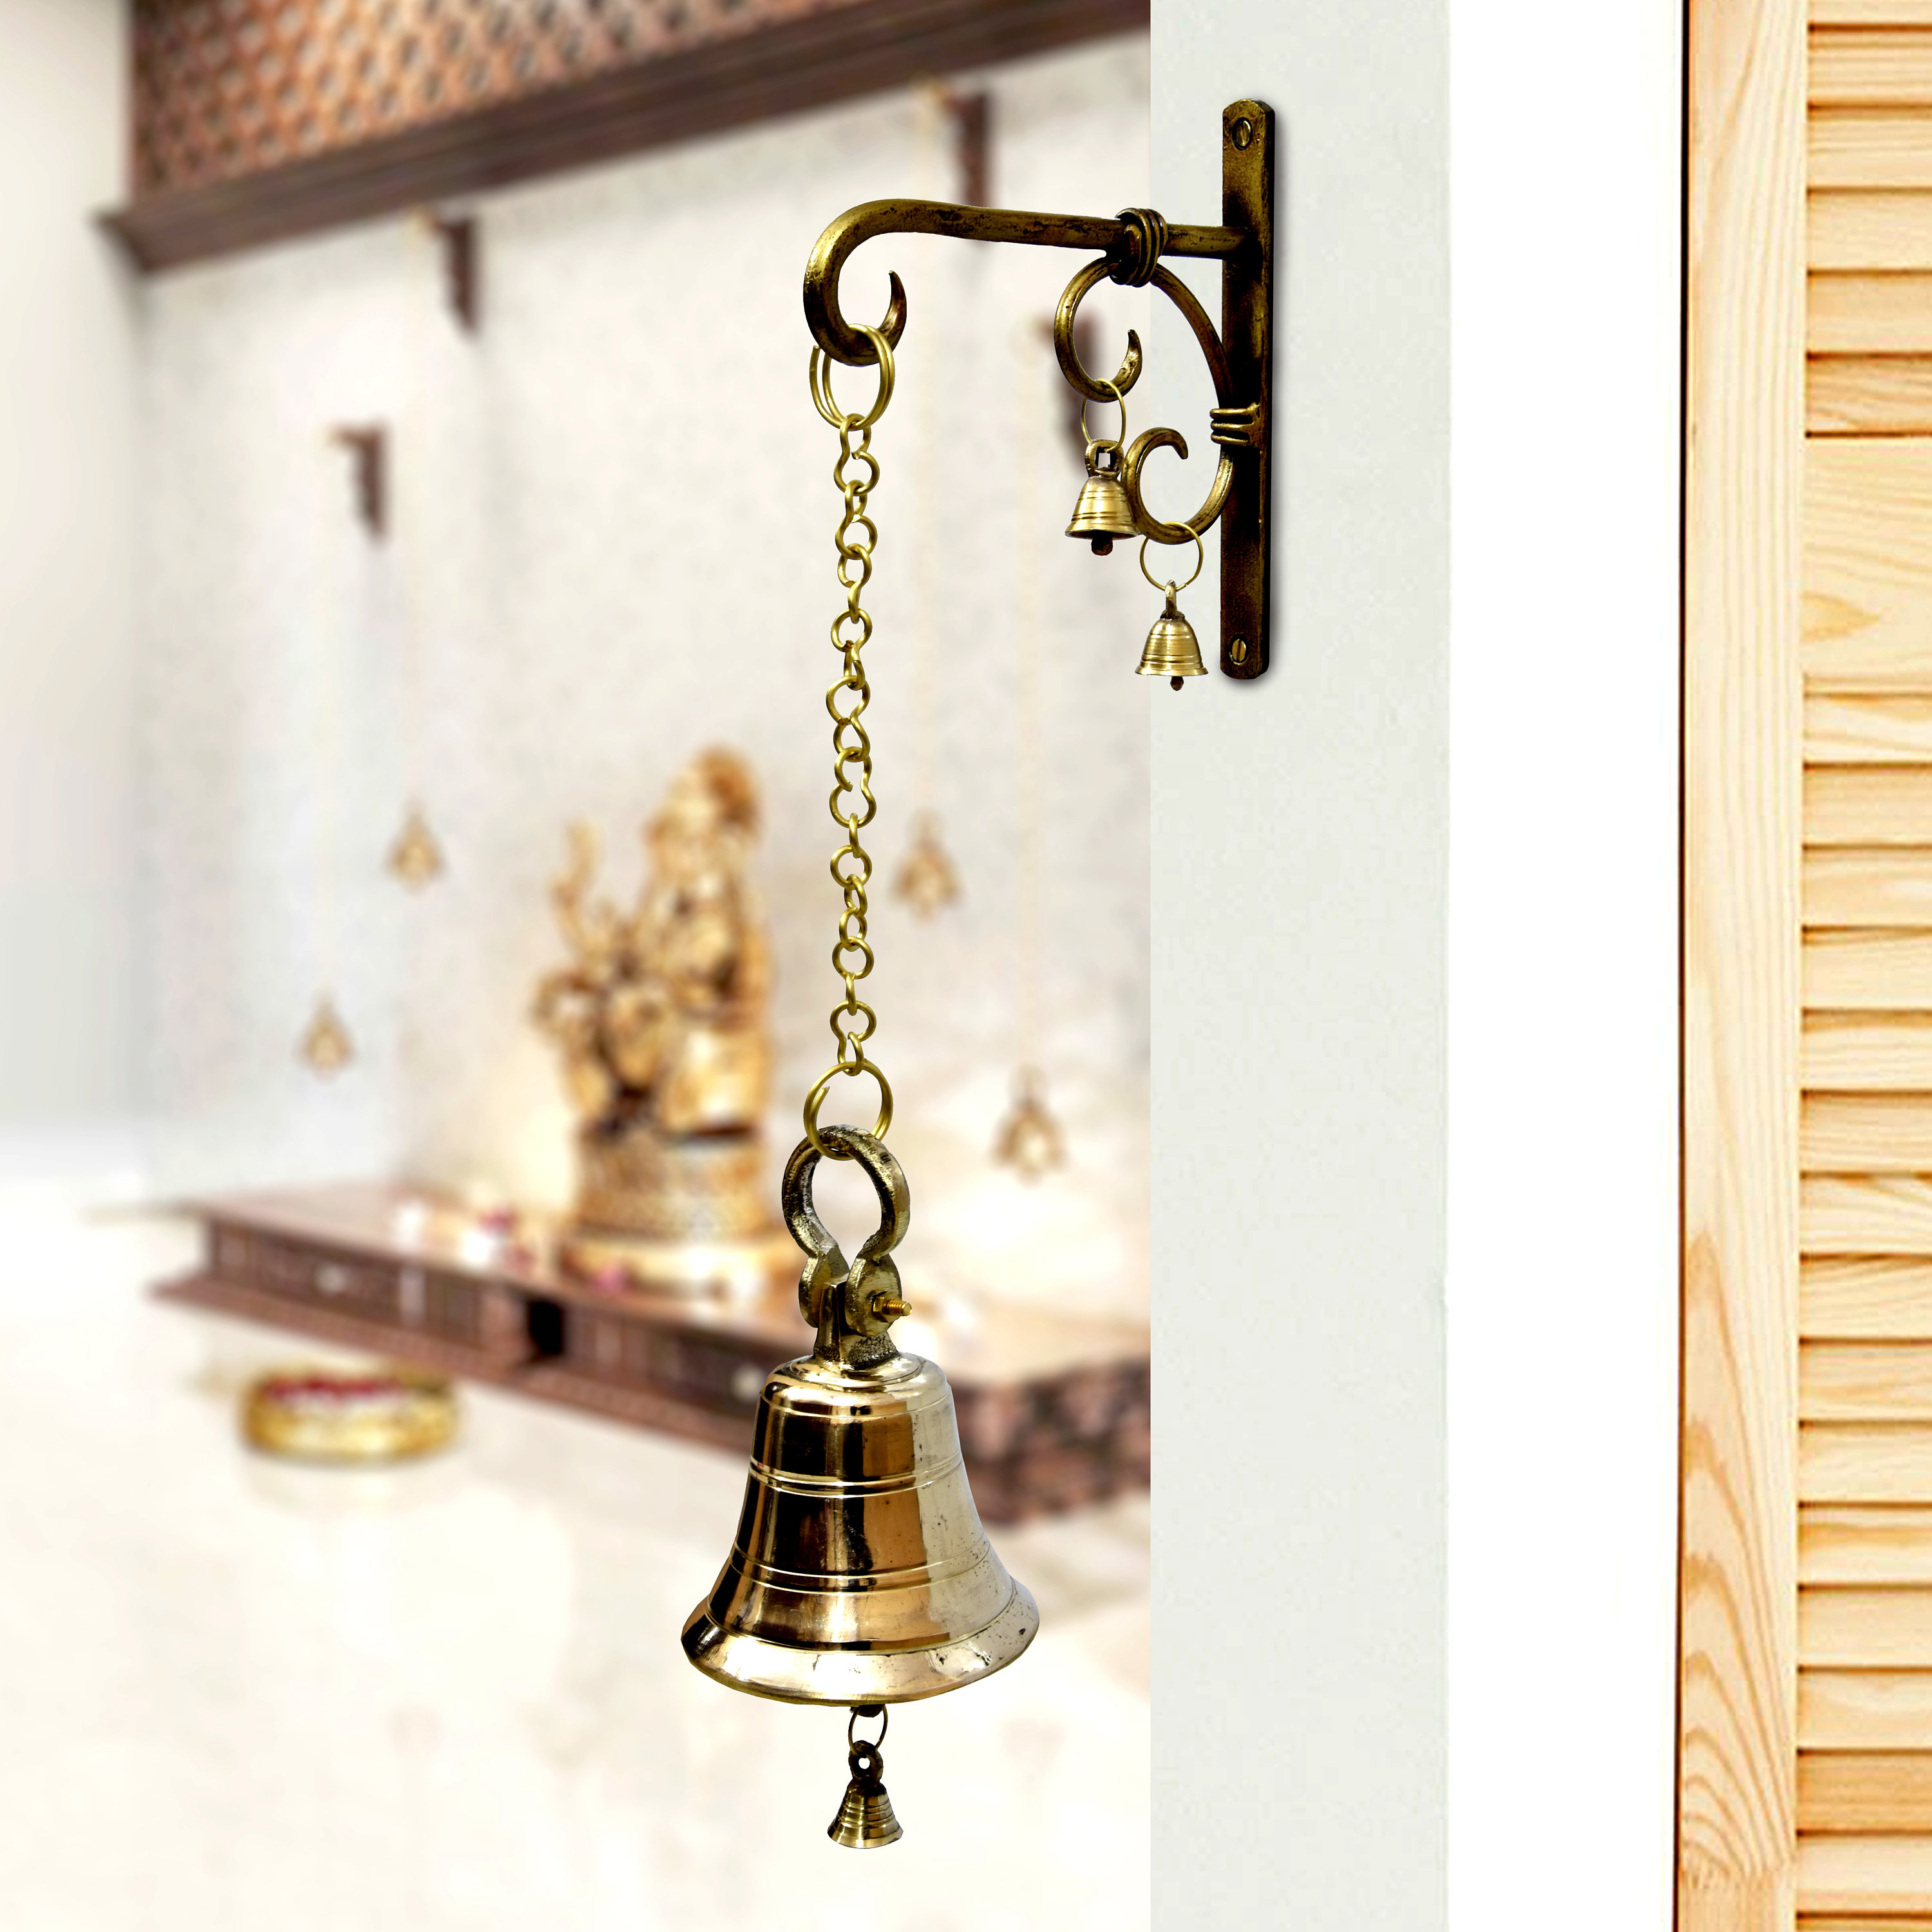 Ethnic Brass Hanging Bell With Chain, Chain for Home Temple, Door, Hallway,  Porch or Balcony Unique Decor Gift Chain Length 24 Inches 